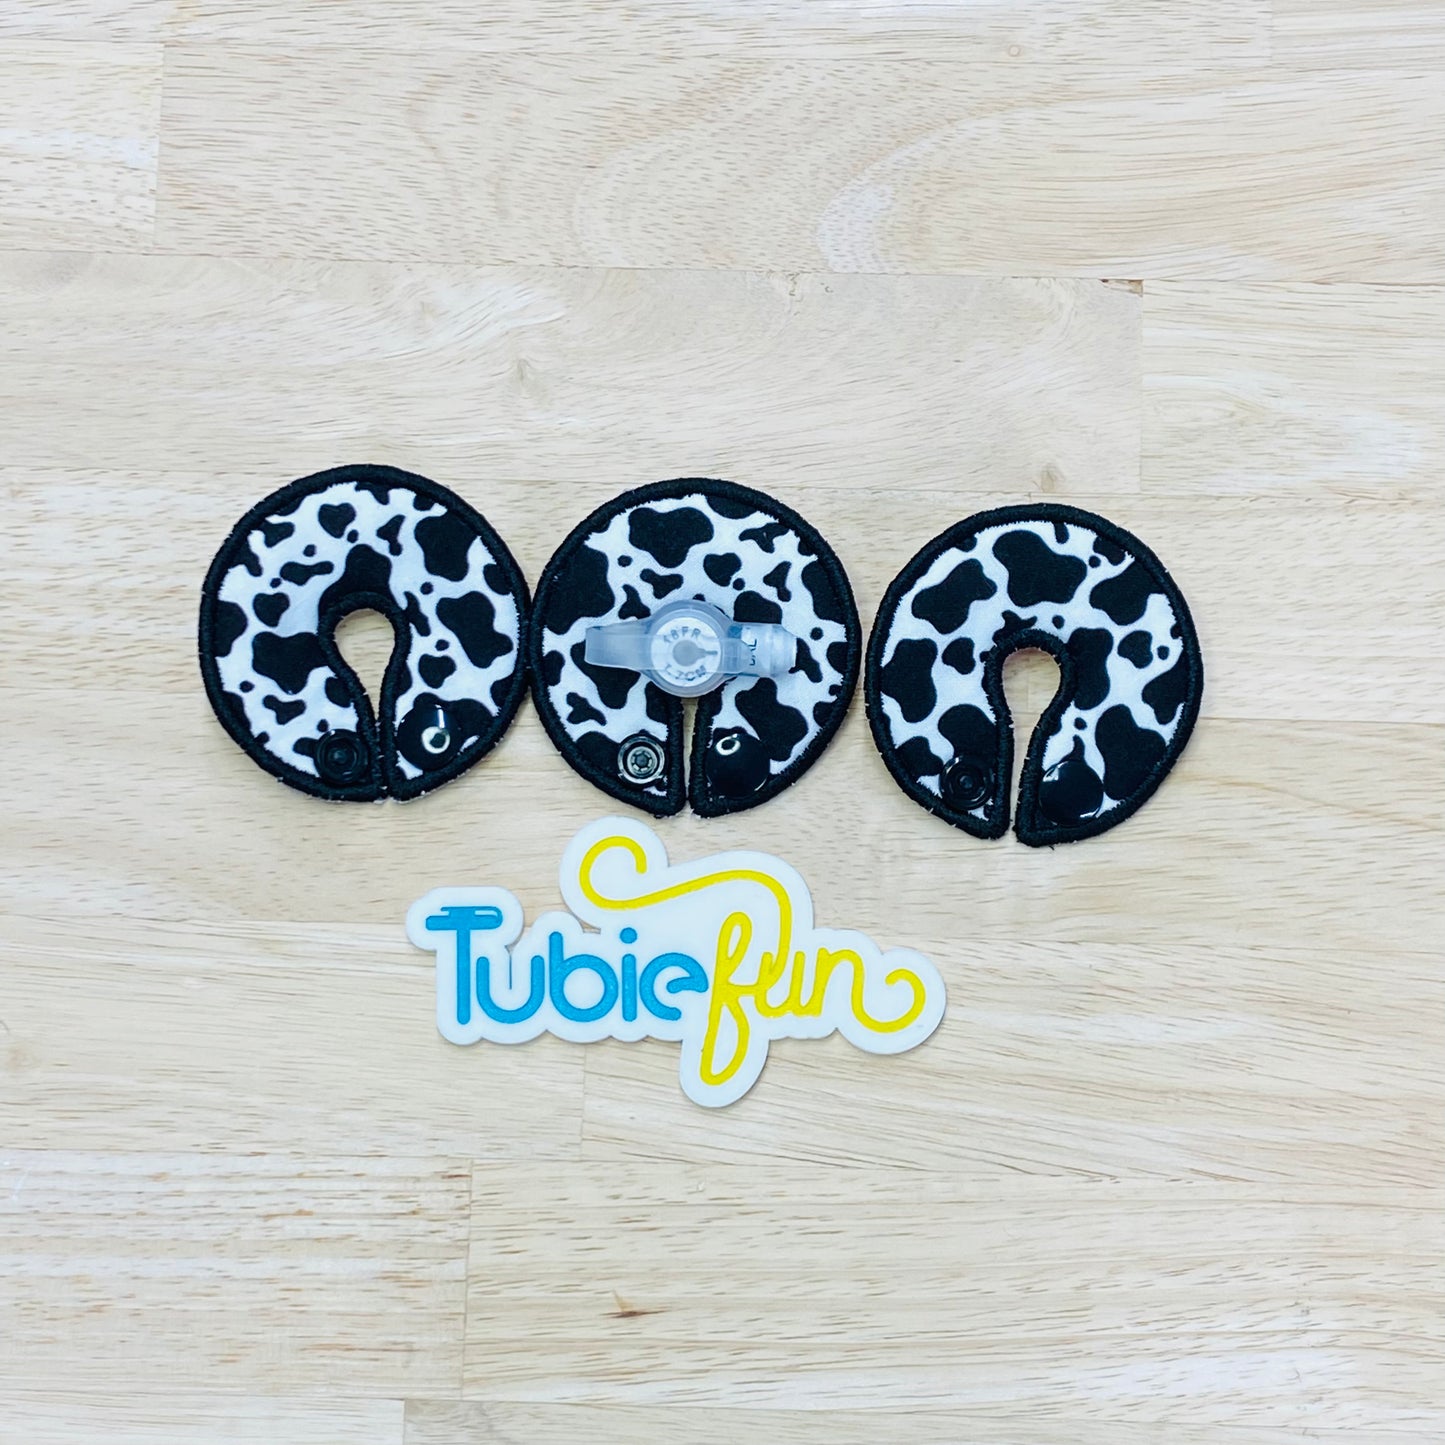 G-Tube Button Pad Cover - Cow Print